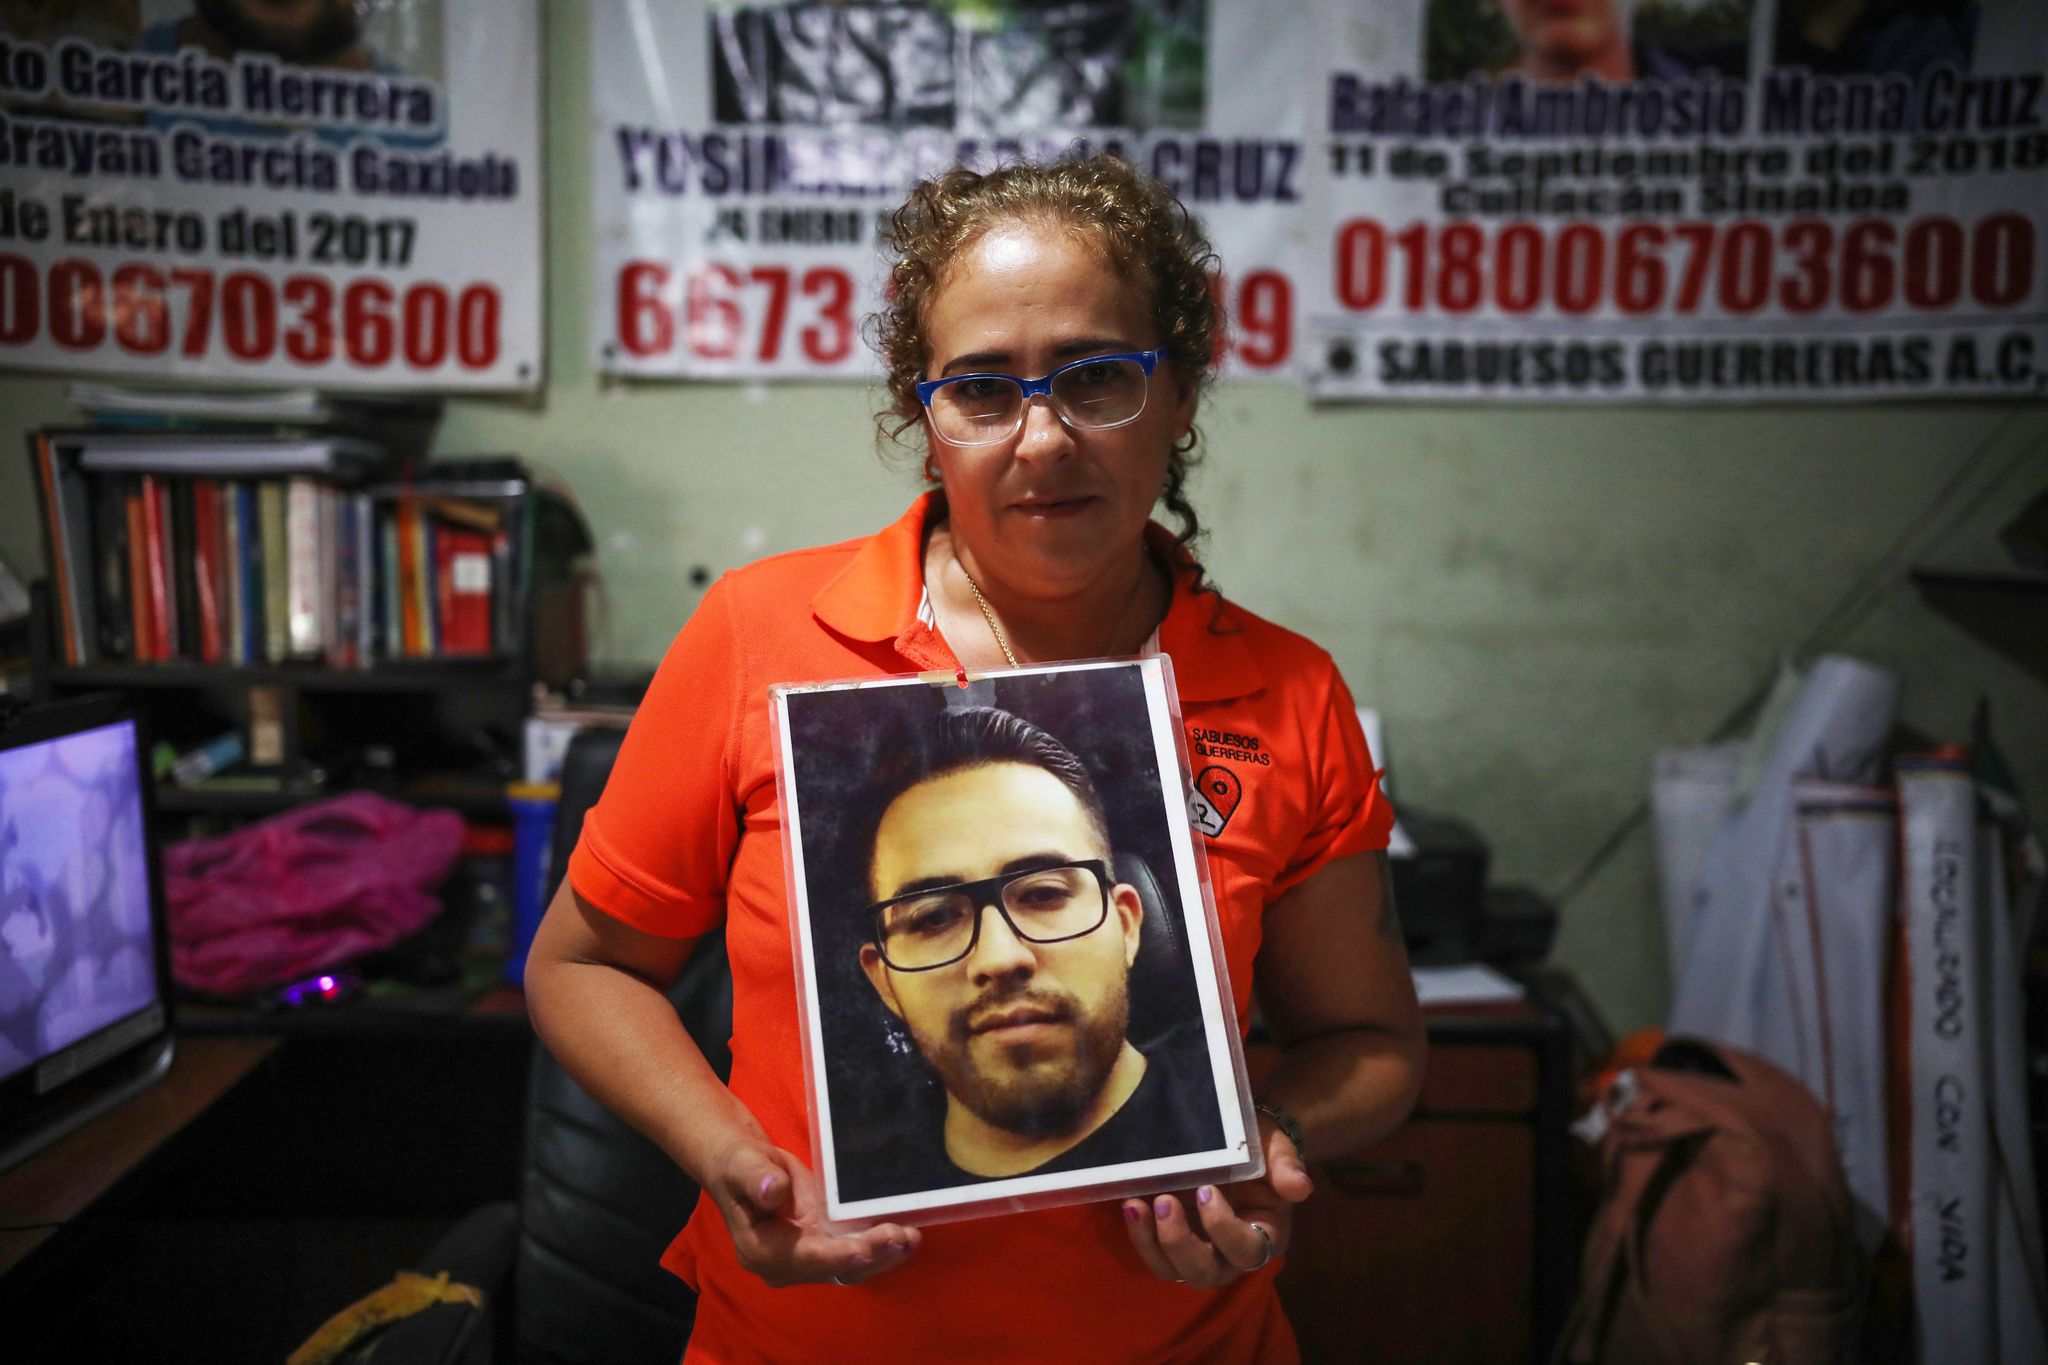 isabel cruz, founder of sabuesos guerros, holds up a photo of her son, yosimar, who has been missing for several years